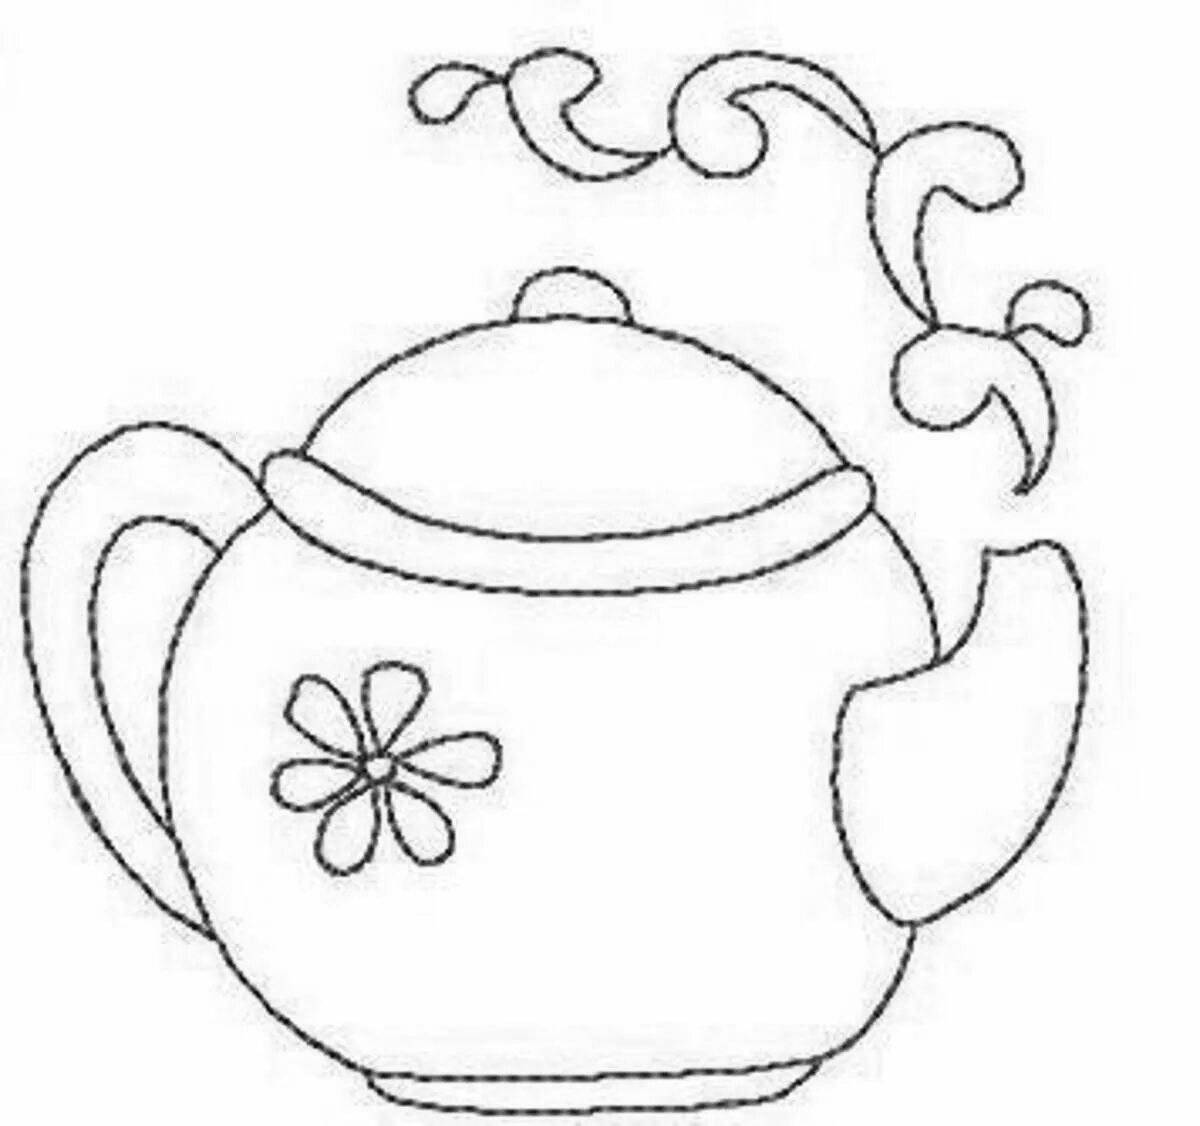 Adorable teapot coloring book for 4-5 year olds